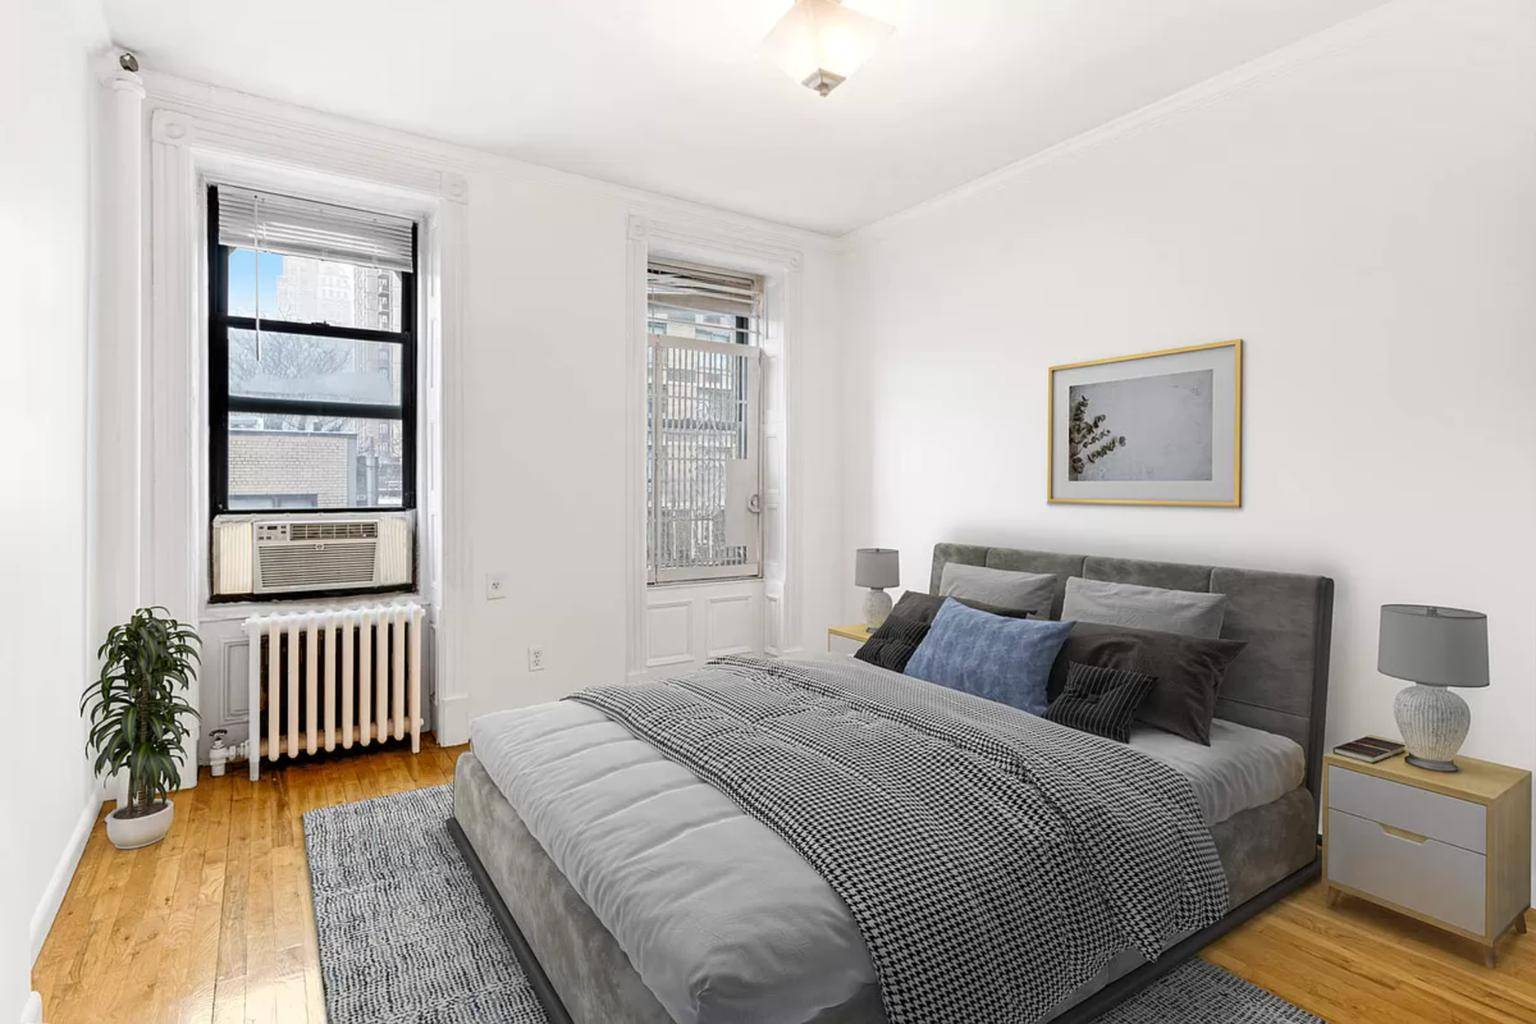 INQUIRE FOR A VIDEO AVAILABLE STARTING JUNE 1ST 1 BEDROOM HOME OFFICE Come and see this beautiful 1 bedroom home office 1 bathroom in a prime UES location just off ...